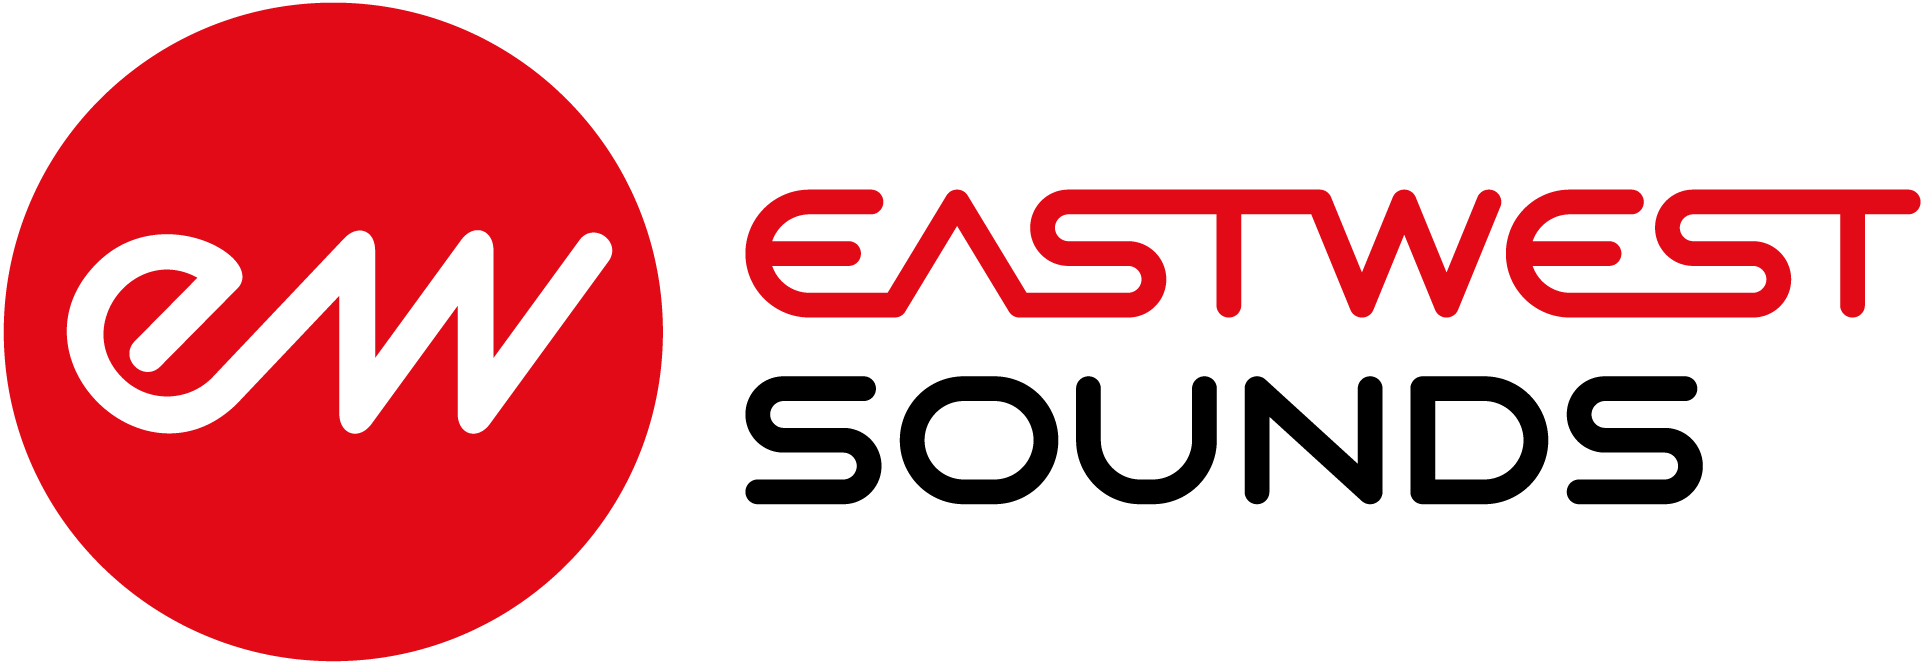 New - EastWest New EastWest MINISTRY OF ROCK 2 Samples Software Mac/PC (Download/Activation Card) - Brief description